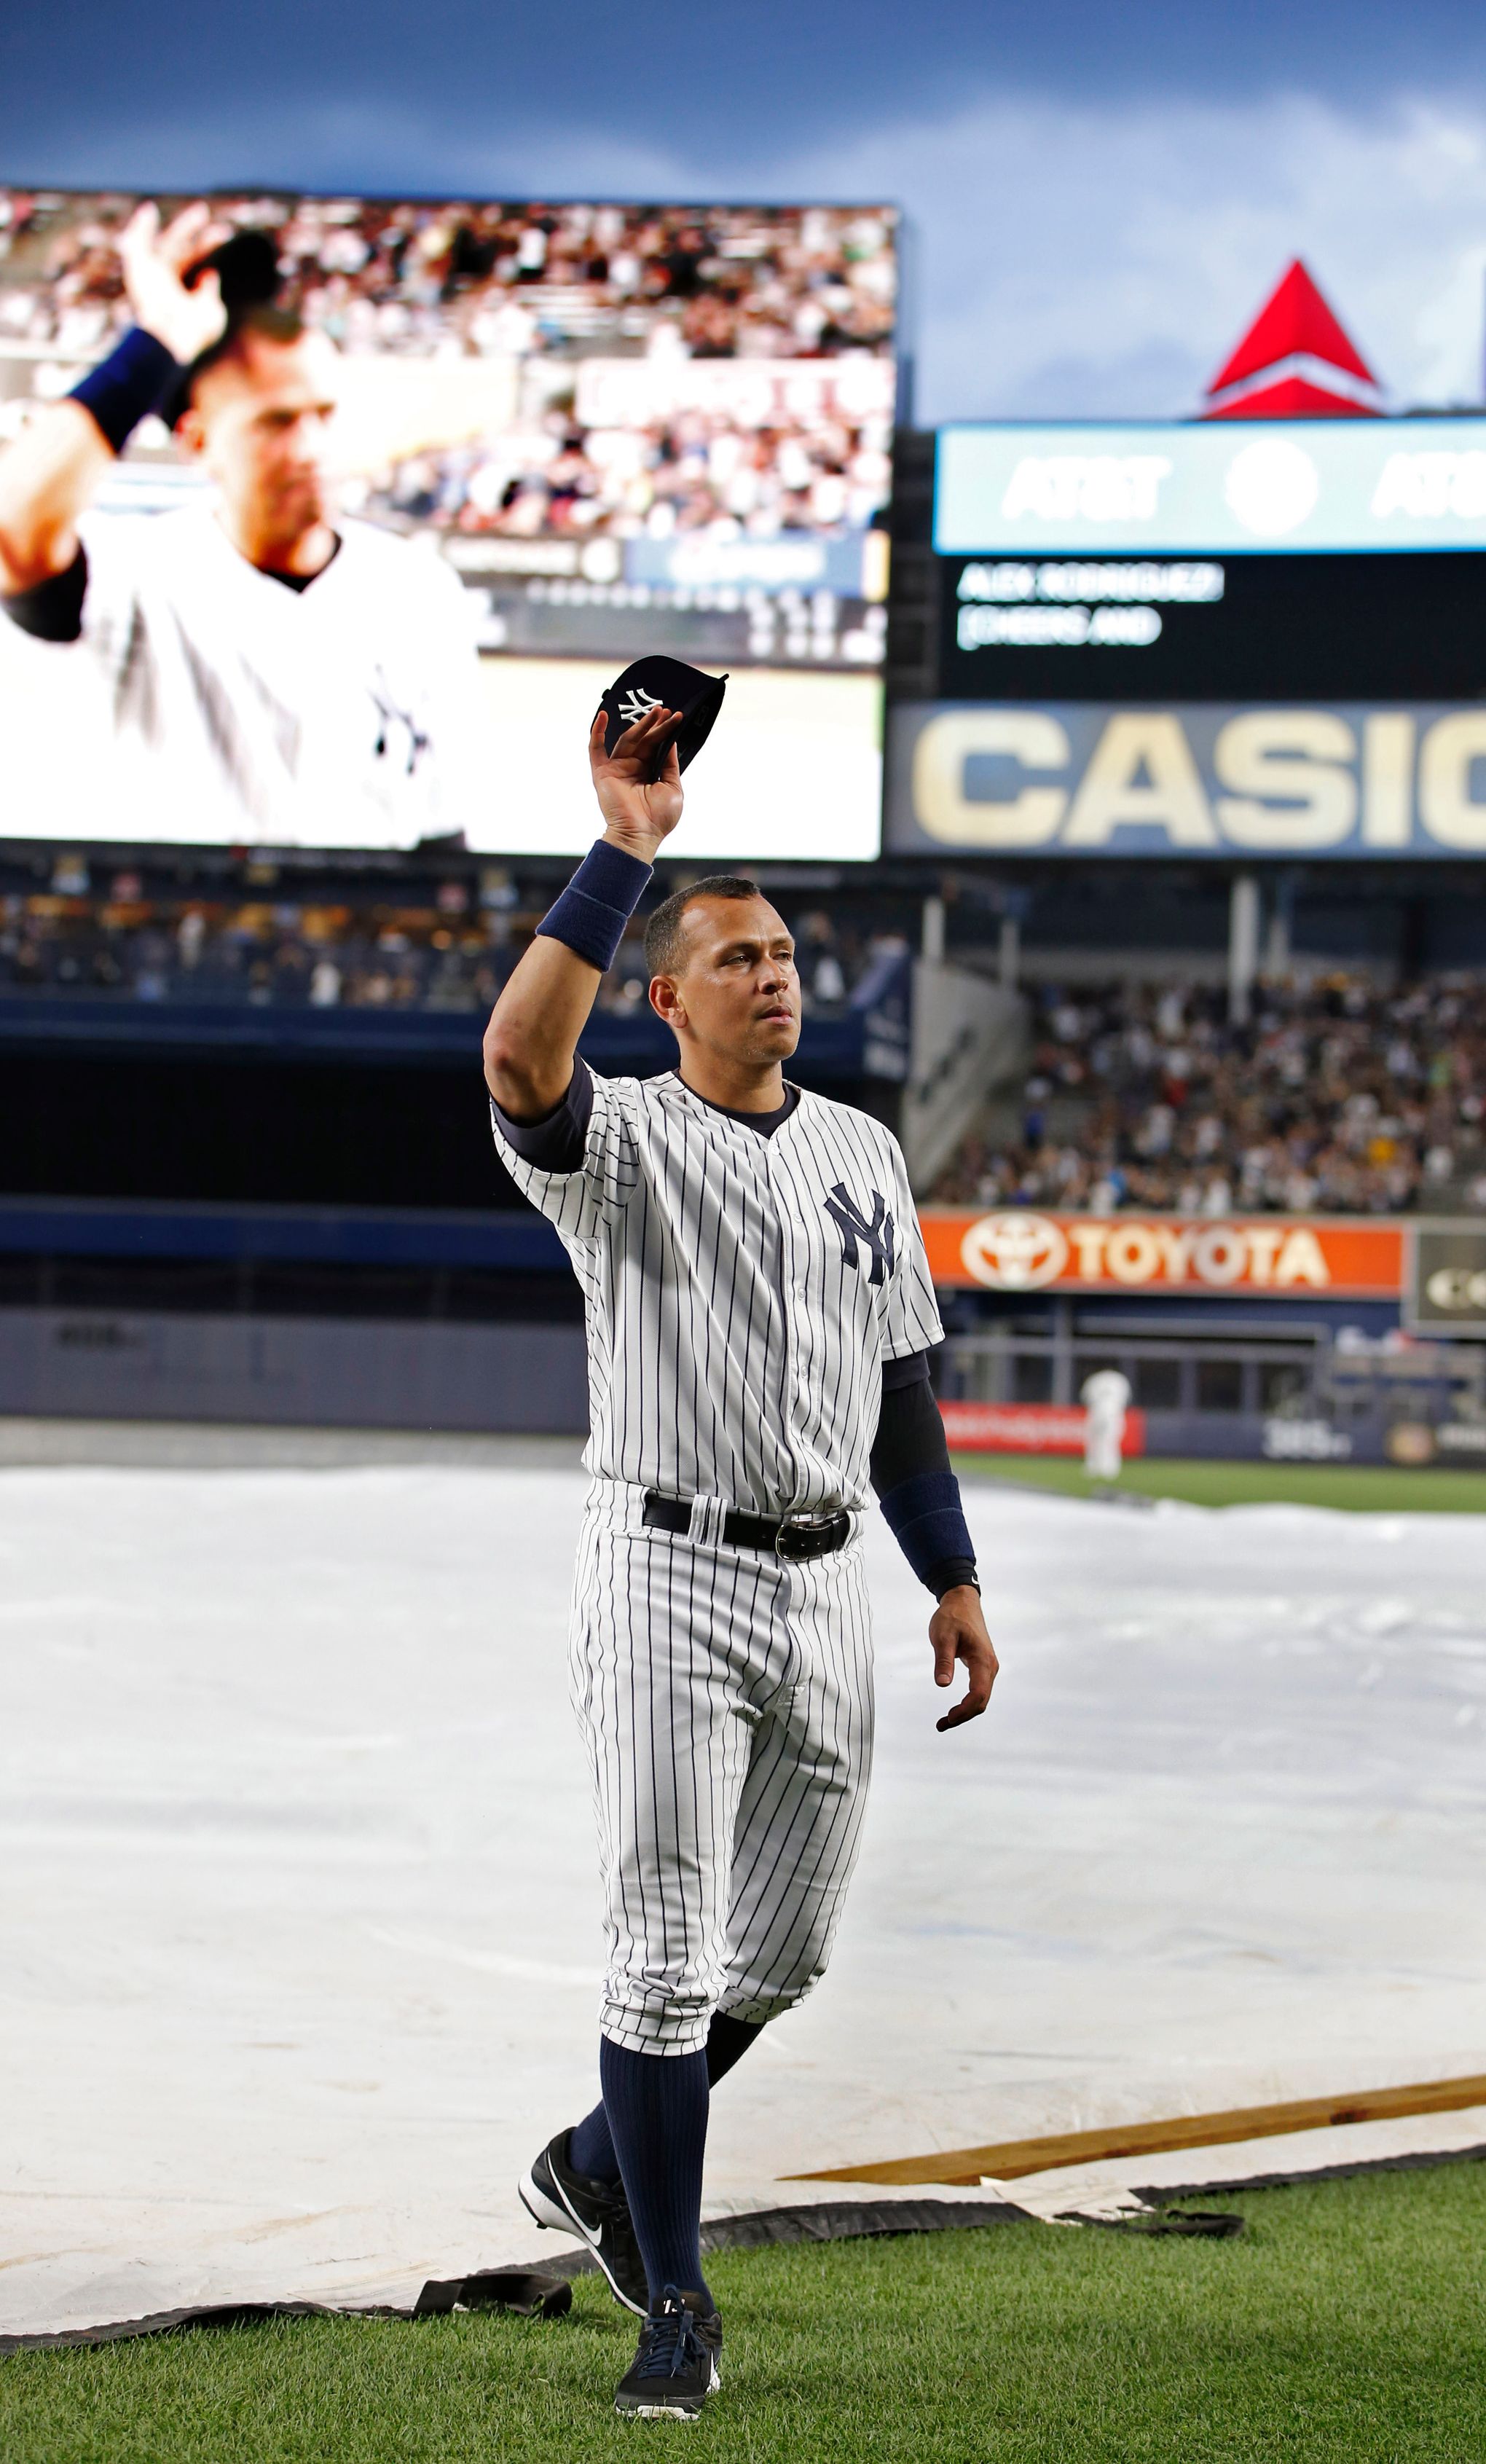 Alex Rodriguez homers for 3,000th hit - CBS News